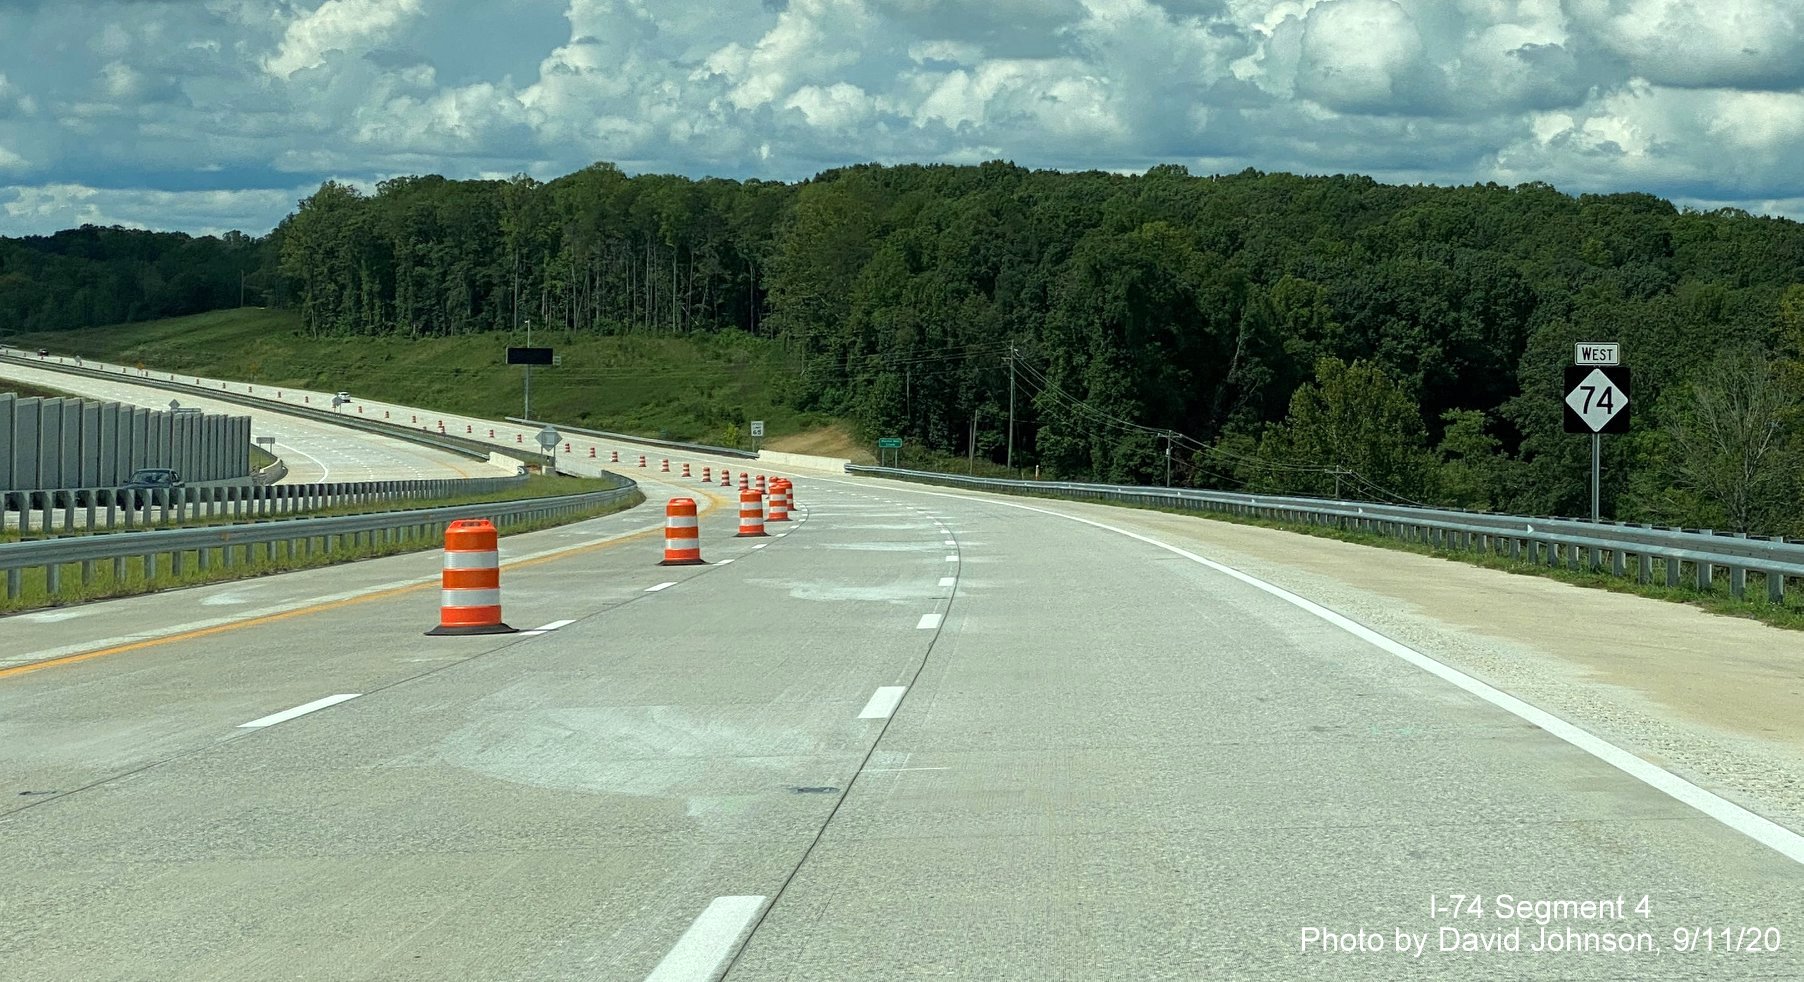 Image of only West NC 74 reassurance marker on newly opened section of Winston-Salem Northern Beltway, by David Johnson September 2020